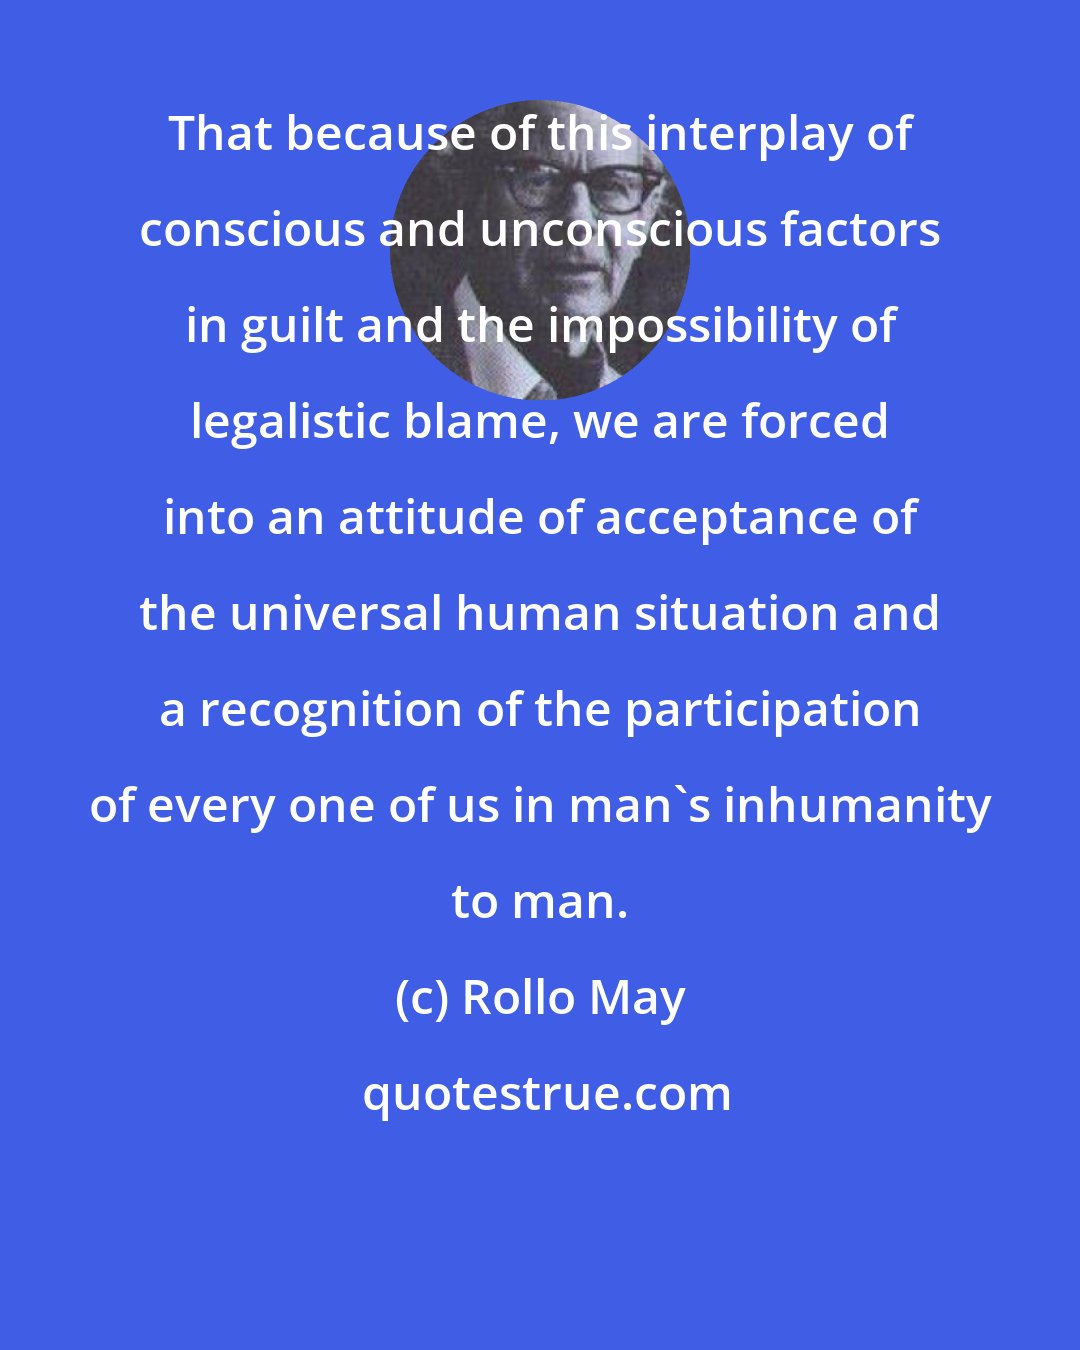 Rollo May: That because of this interplay of conscious and unconscious factors in guilt and the impossibility of legalistic blame, we are forced into an attitude of acceptance of the universal human situation and a recognition of the participation of every one of us in man's inhumanity to man.